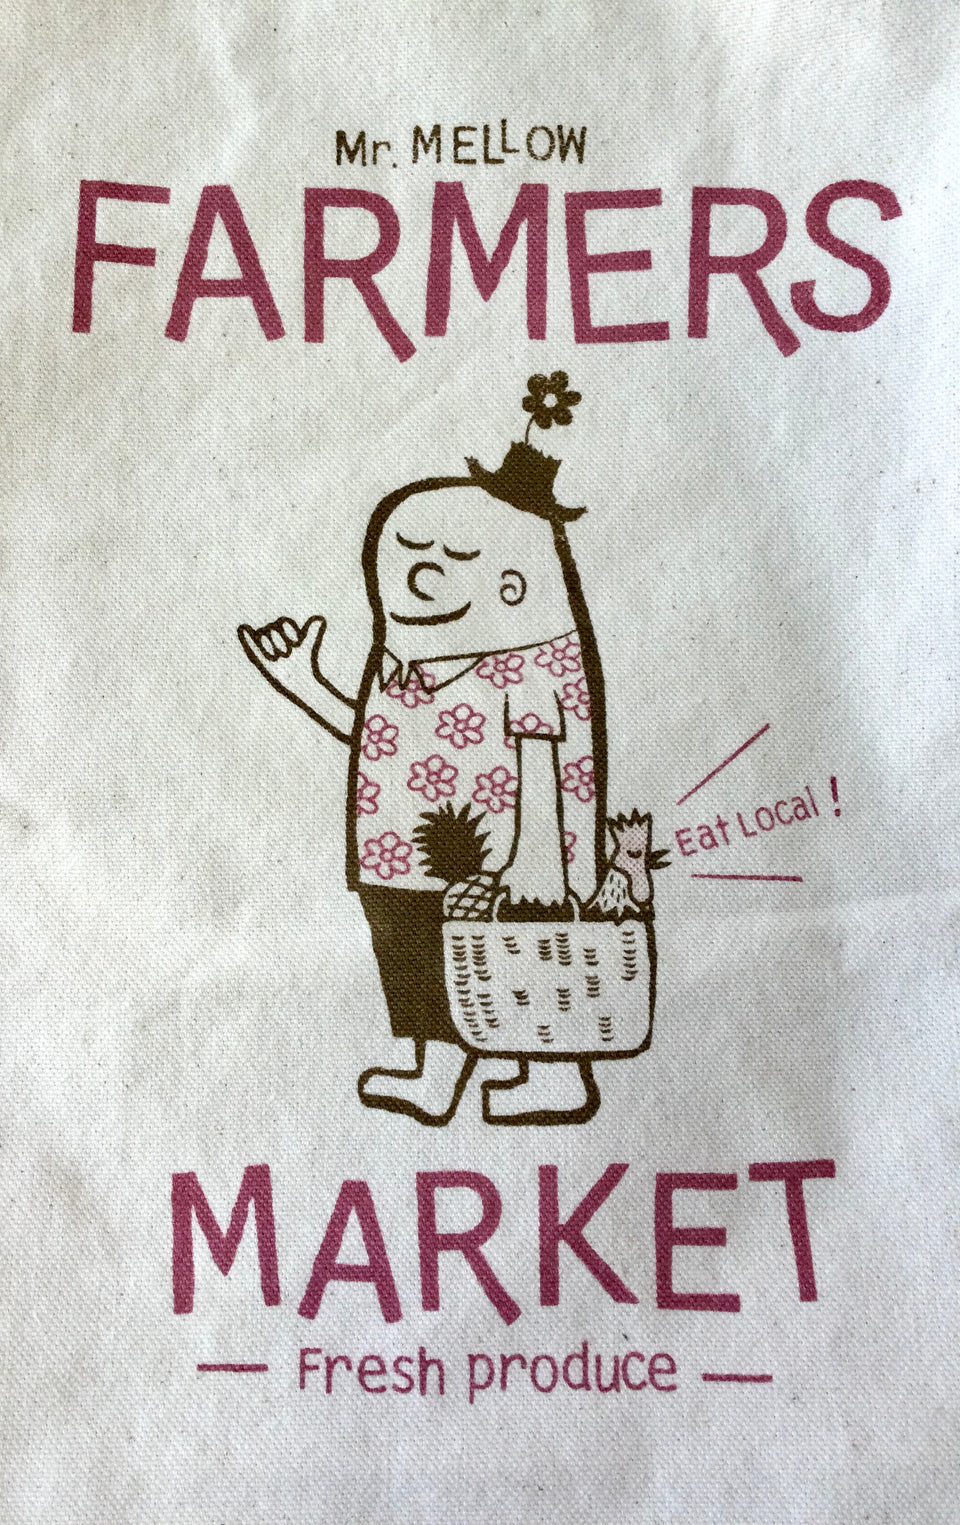 Detail of farmers market design on the tote.